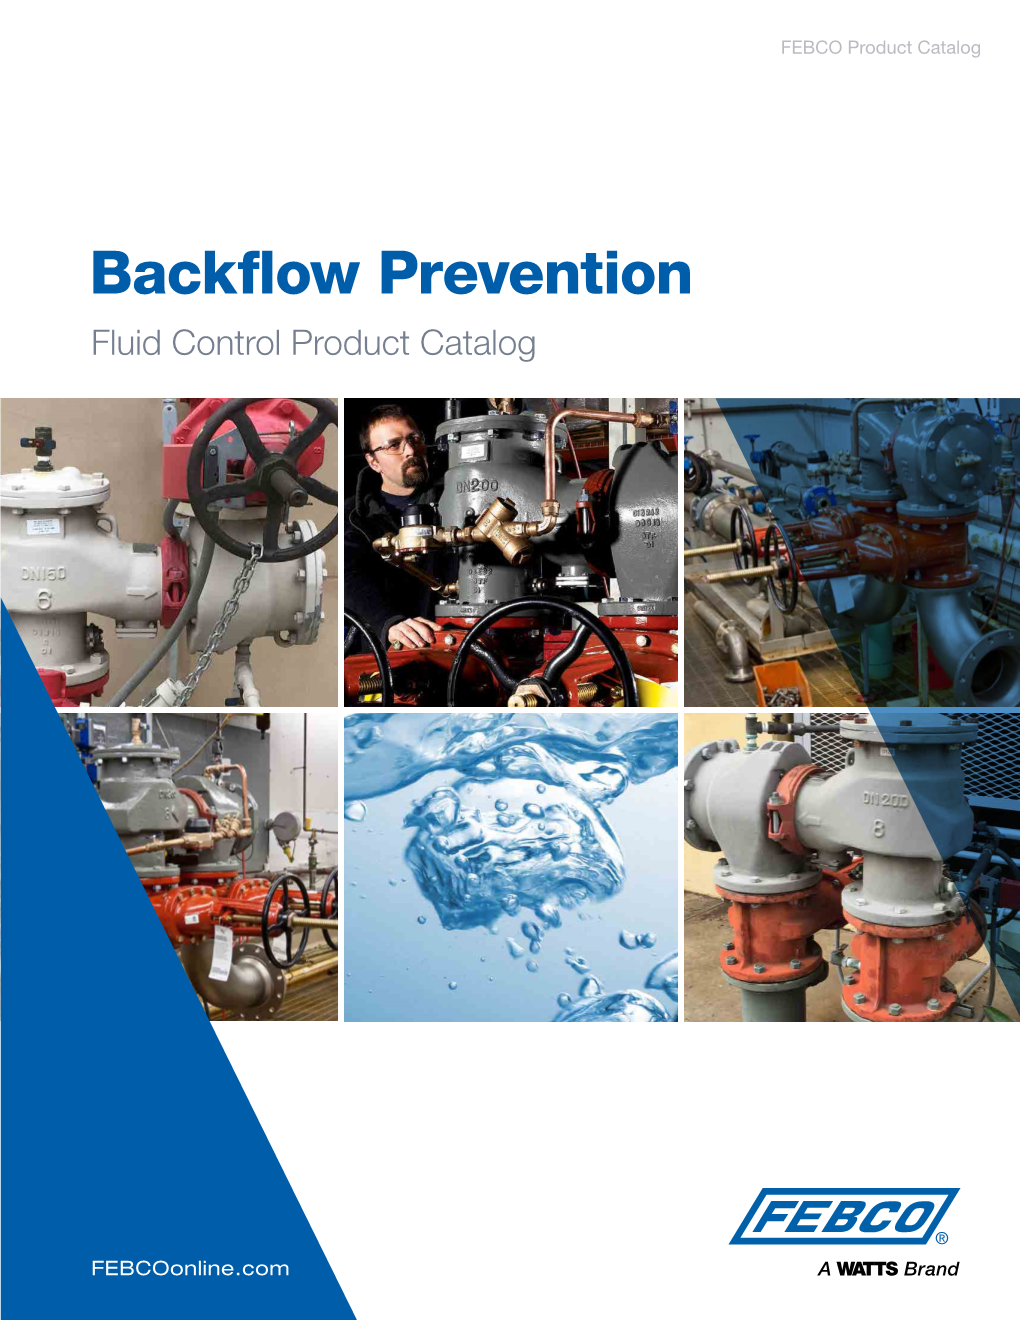 Backflow Prevention Fluid Control Product Catalog